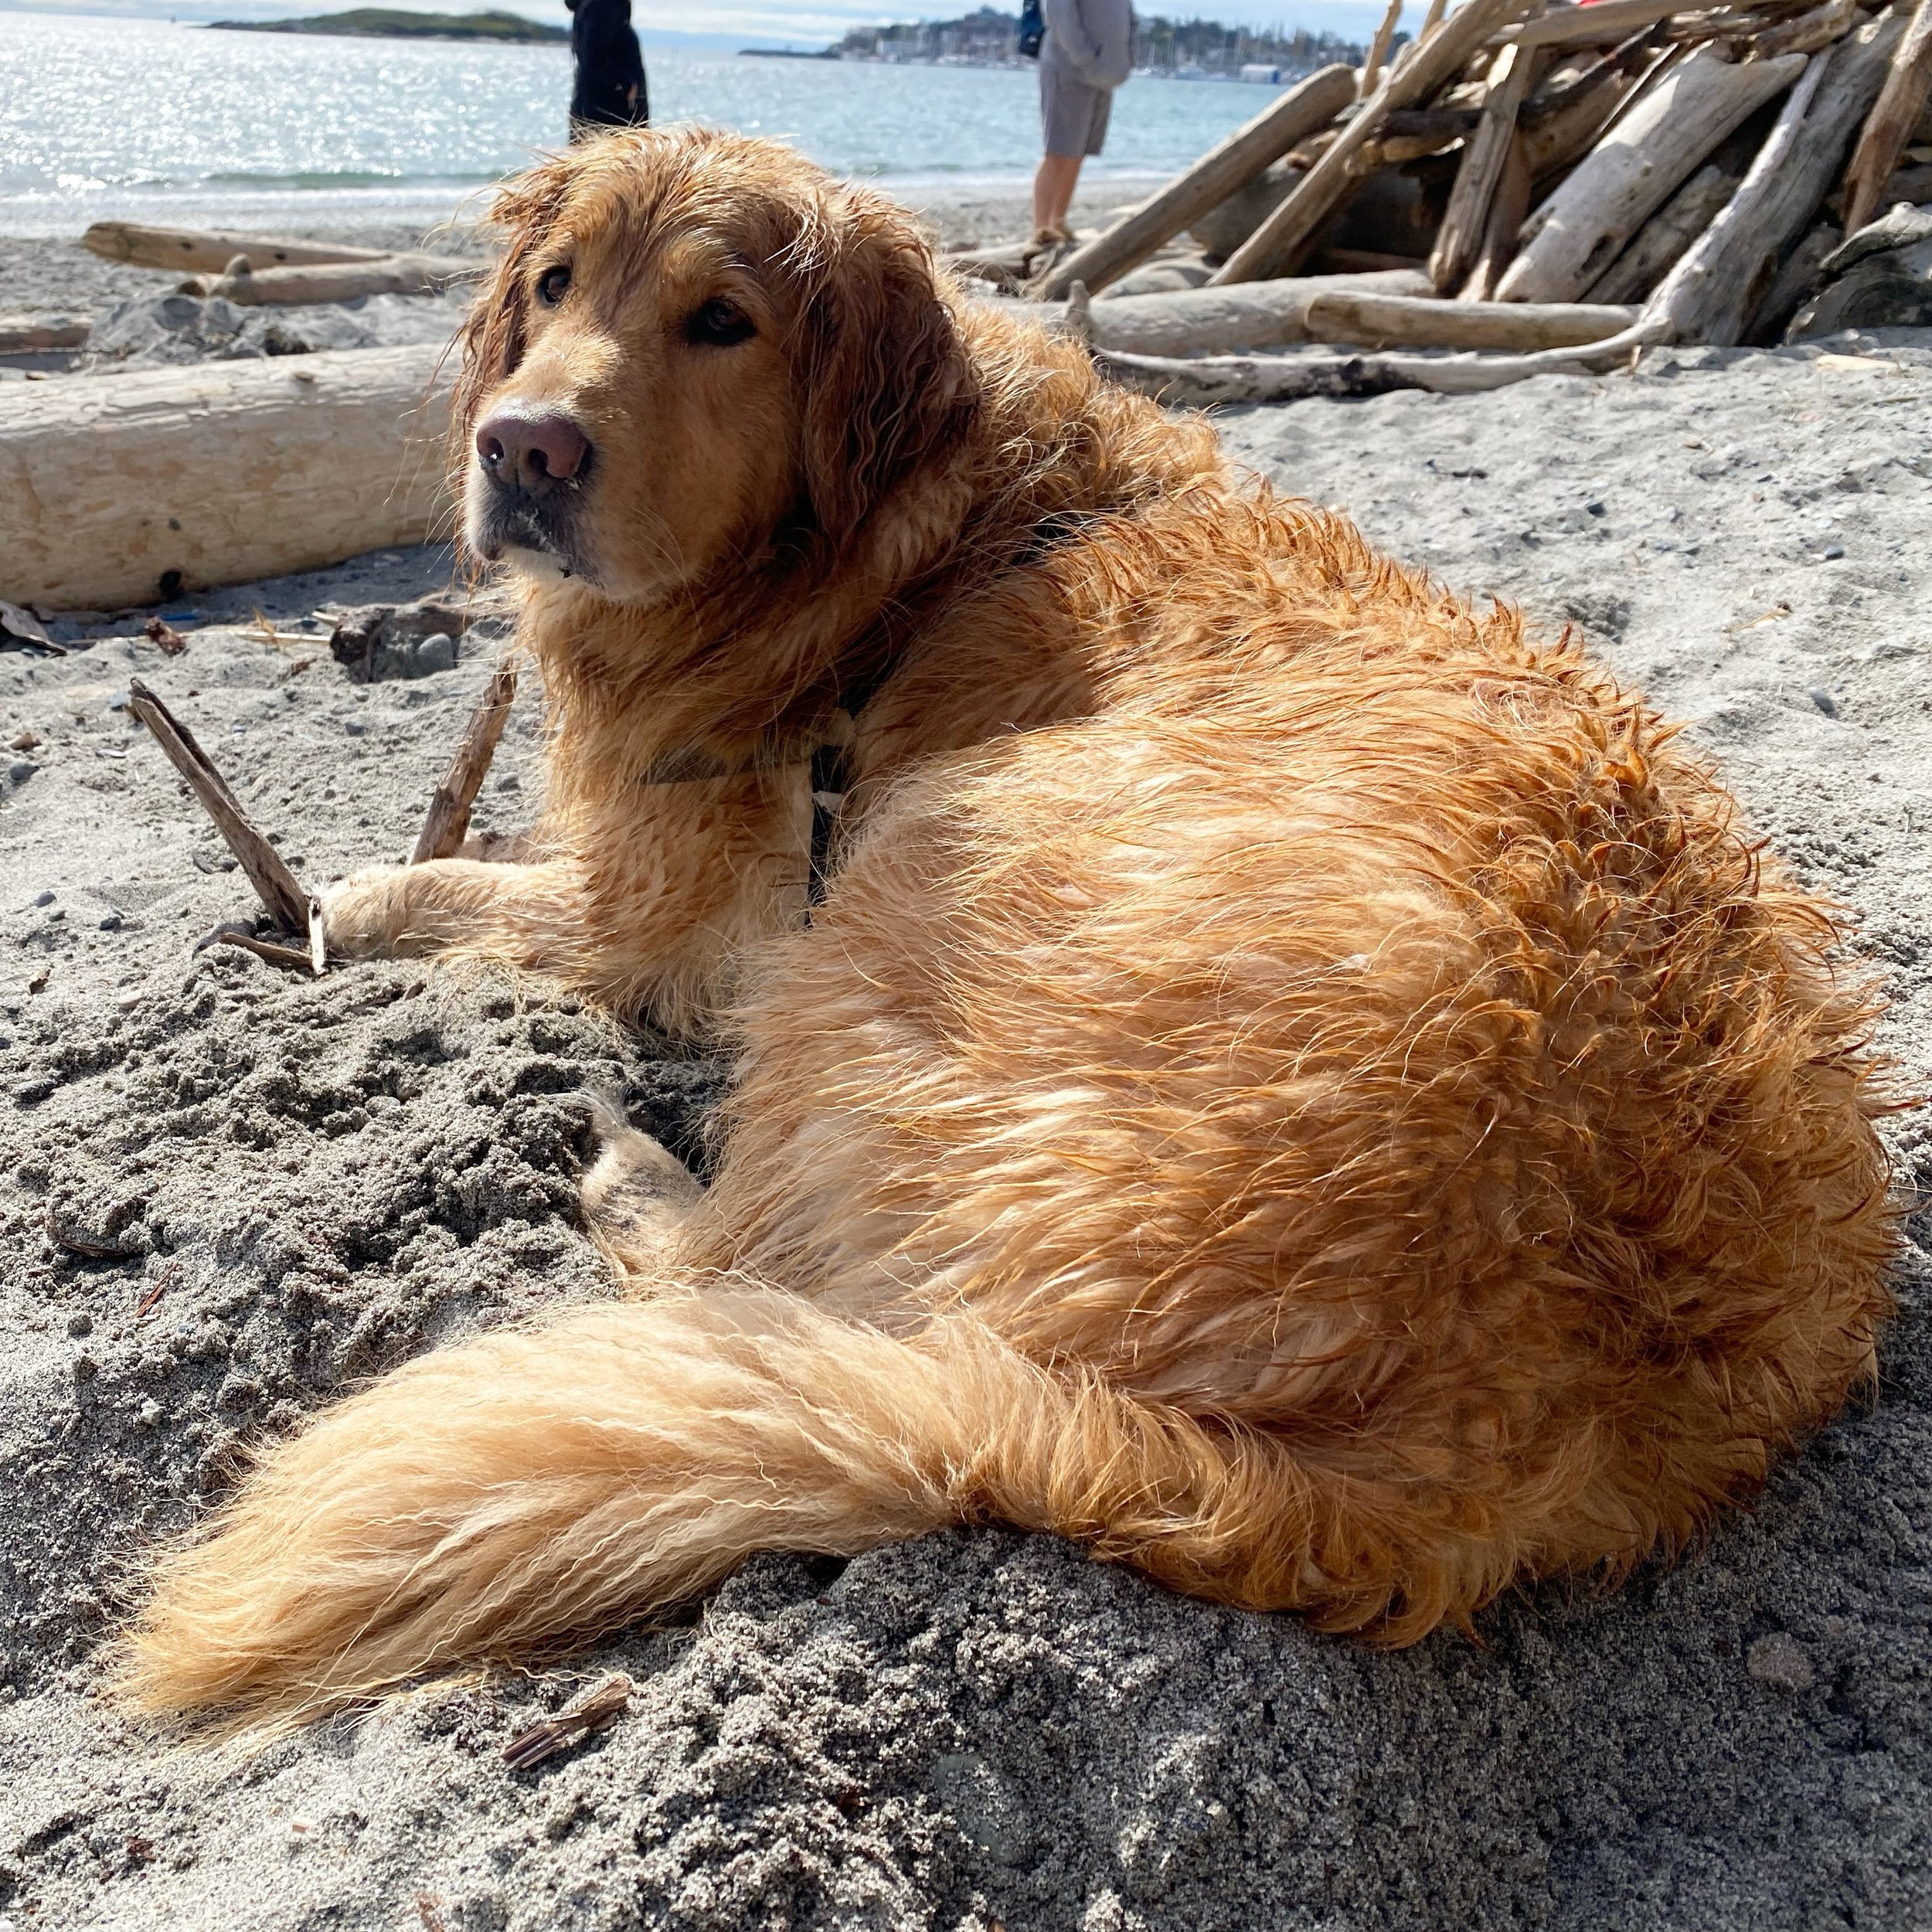 Life is good! Soaking up the last of the beach days at Willows, only a couple weeks left until summer dog ban so get your pups and enjoy until May 1! 🐾 🏖️ 

.
.
.
#willowsbeach #dogsofinstagram #goldenretriever #goldensoninstagram #dogsarethebest #